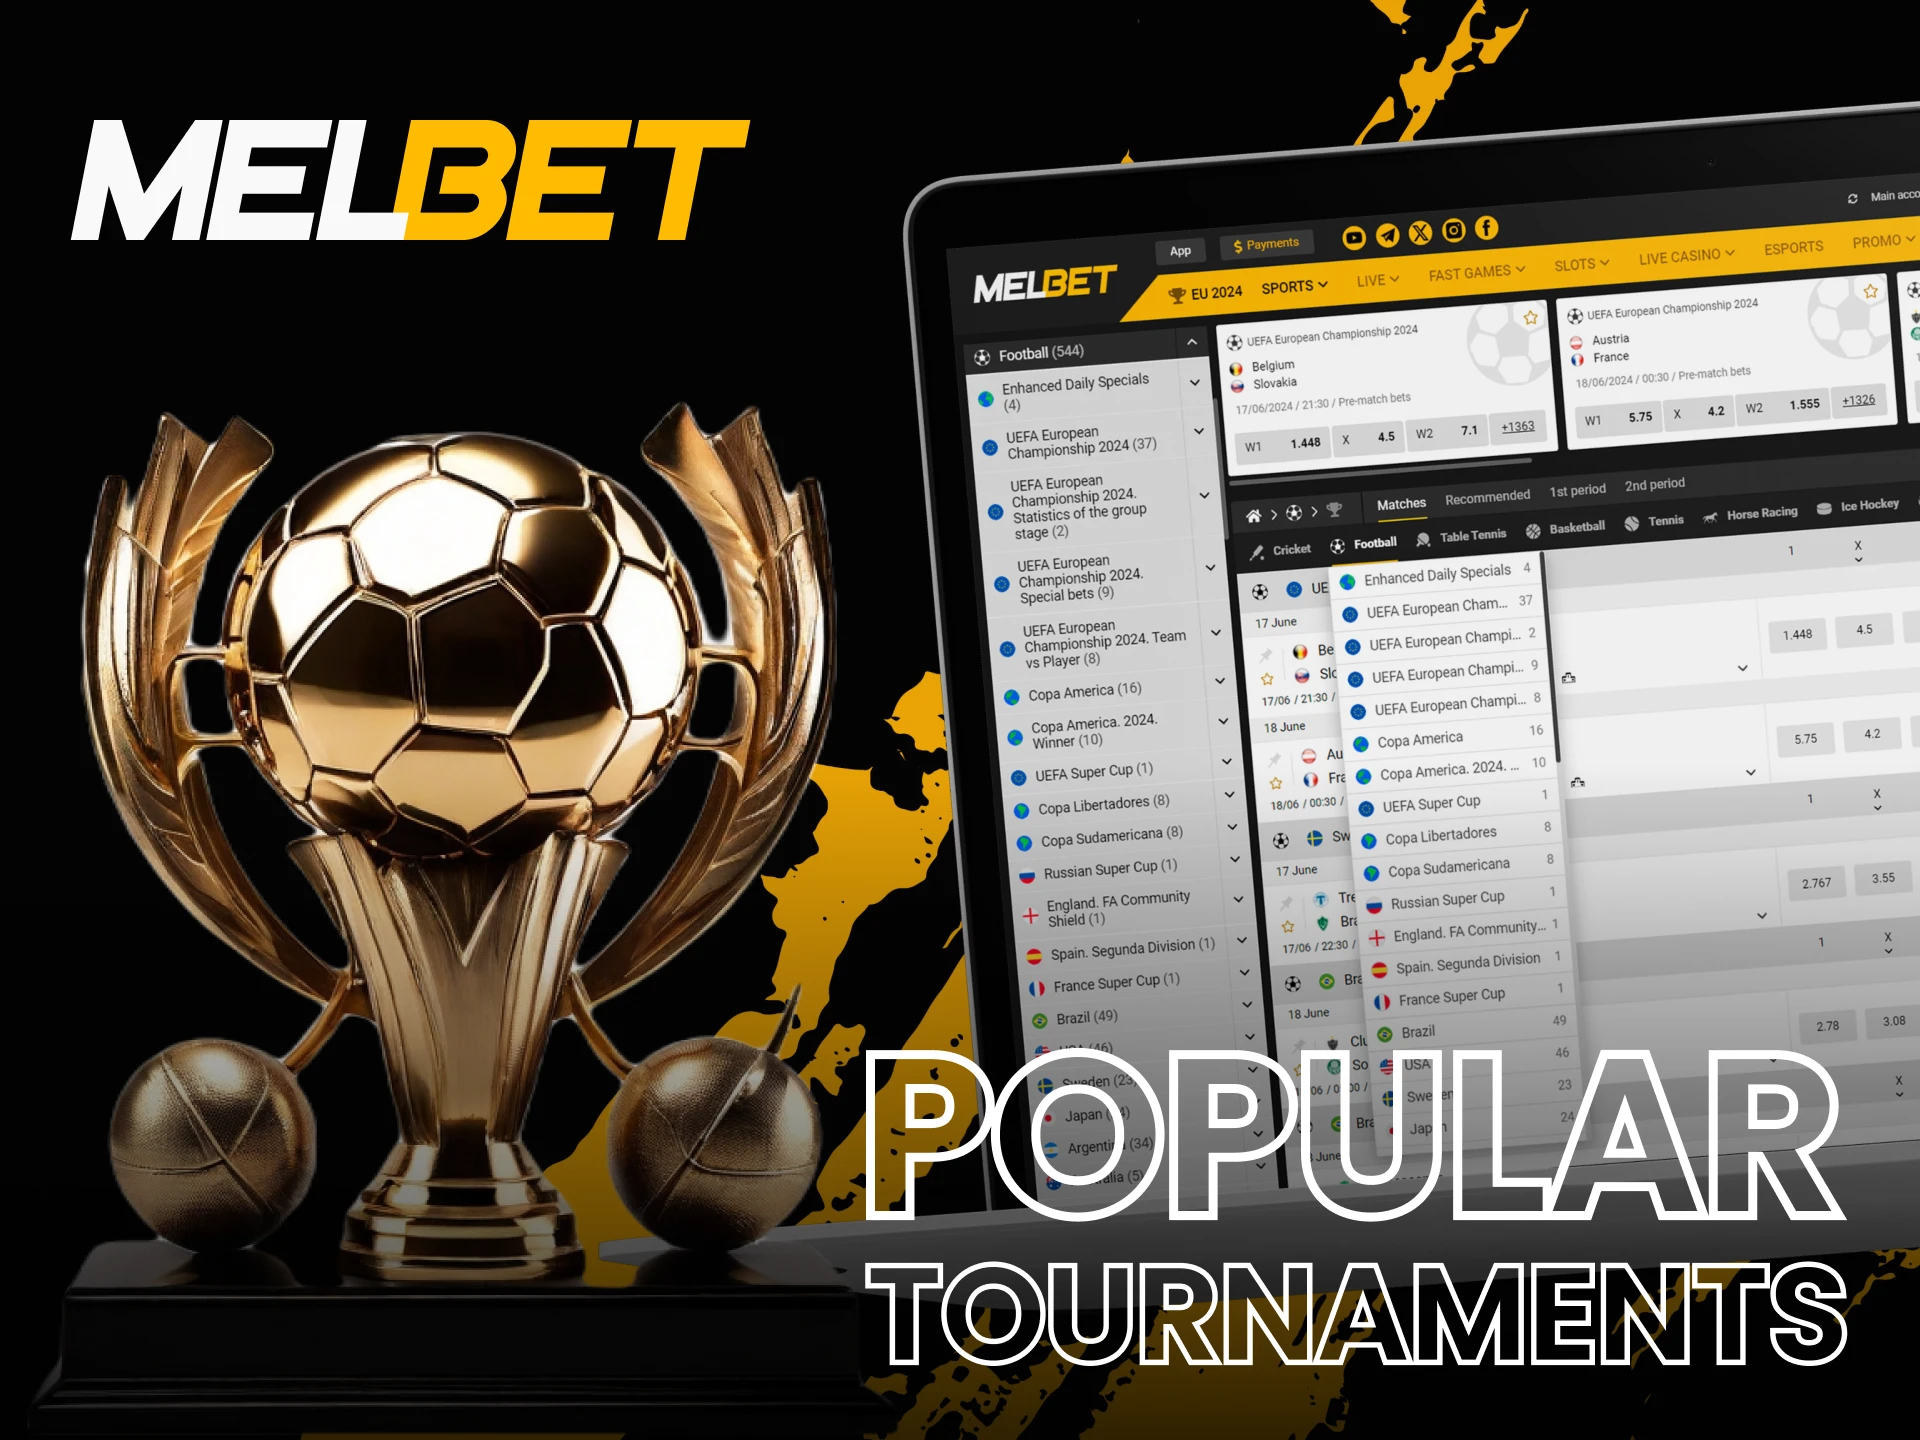 Try betting on popular football tournaments at Melbet.